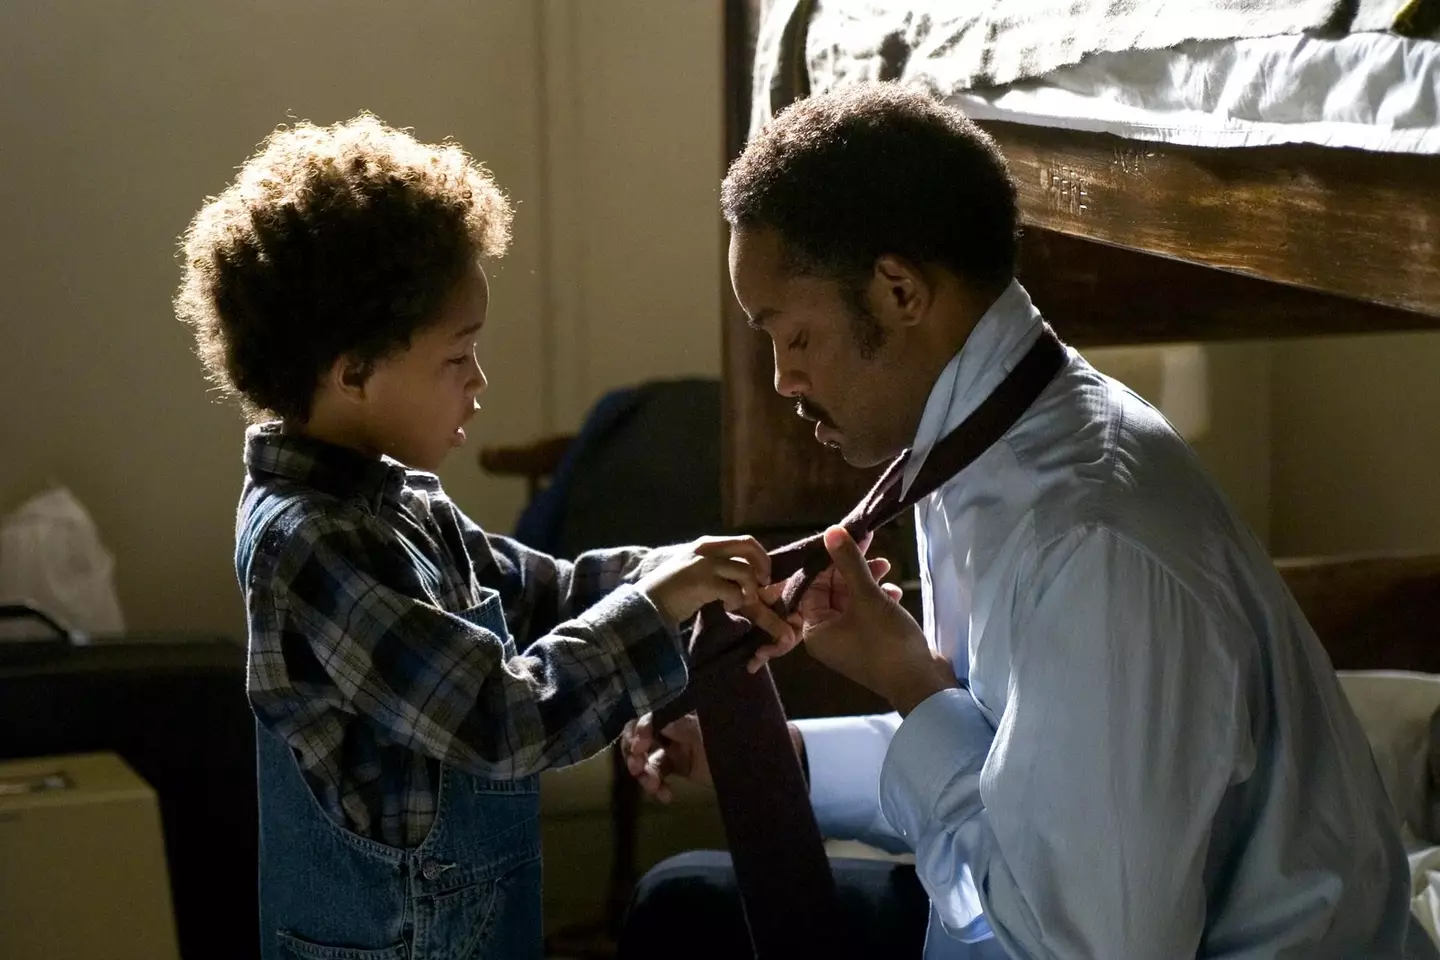 Will Smith plays Chris Gardner in The Pursuit of Happyness film released in 2006.